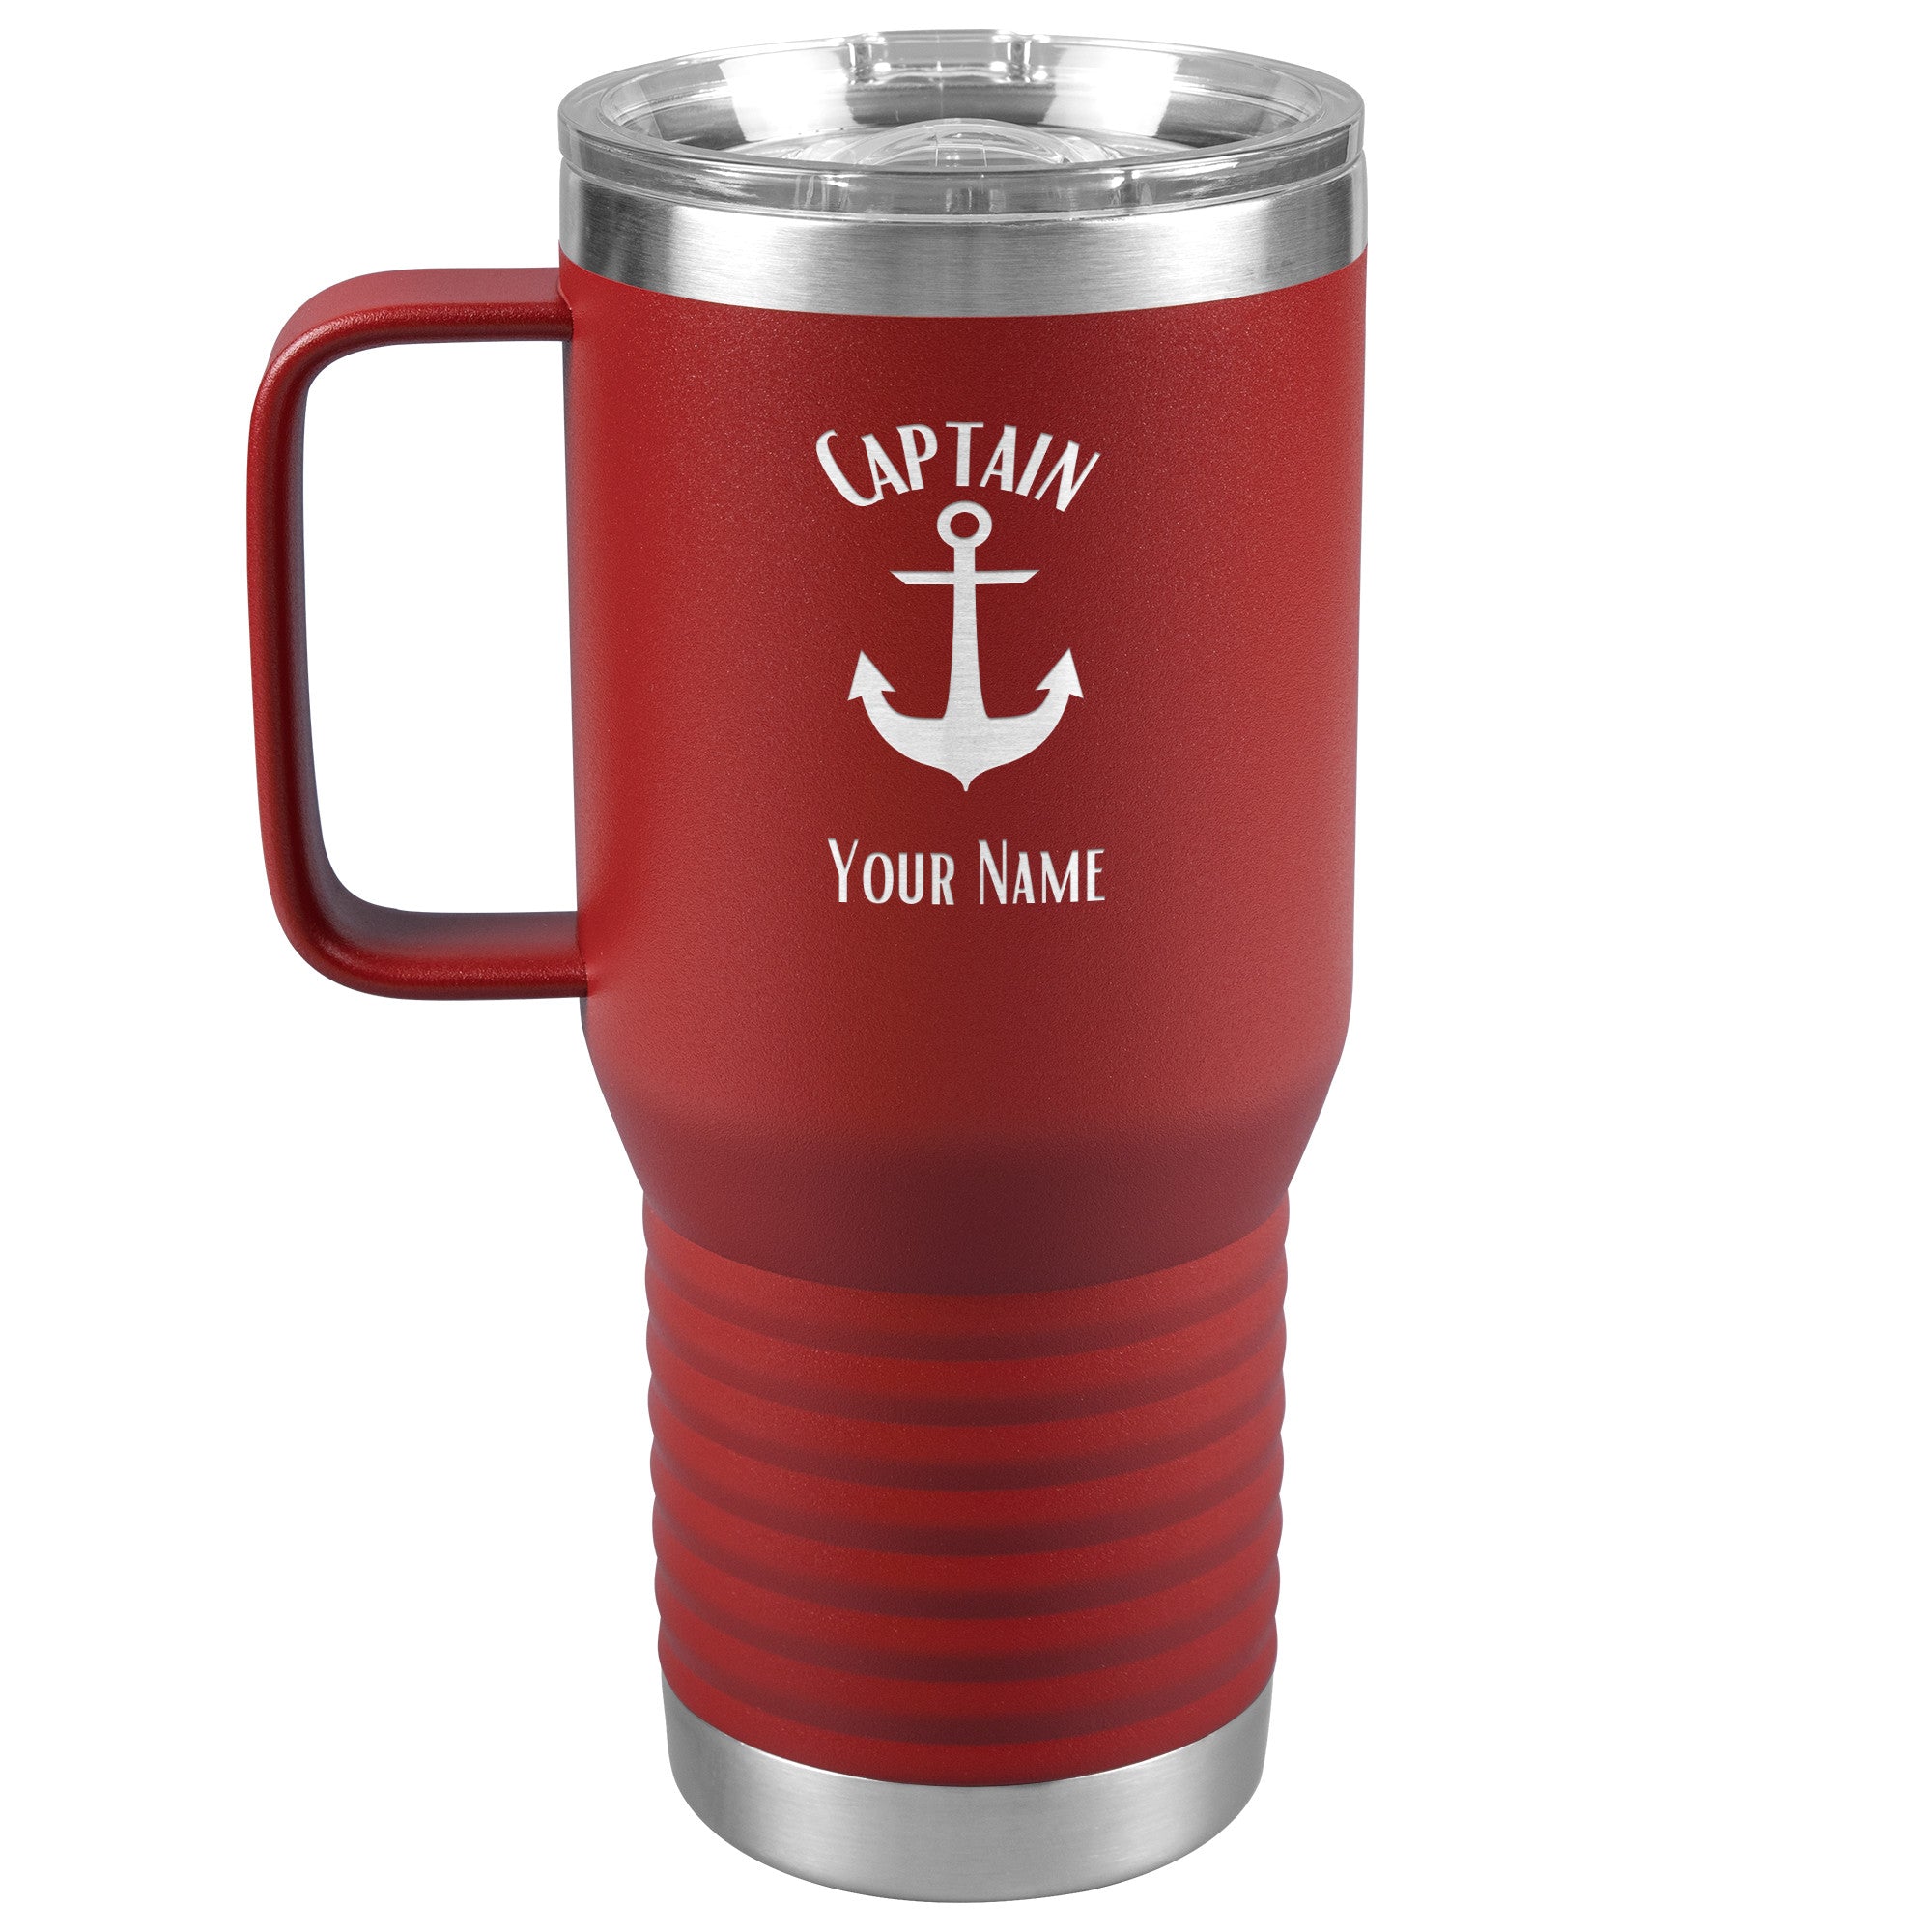 Didaey 4 Pcs Boating Gifts for Men Summer Gifts for Boaters Set I'm Captain  Tumbler Gift Stainless Steel Nautical Cups Rudder Nautical Beer Opener Boat  Captain Cap Nautical Ships and Boats Socks 